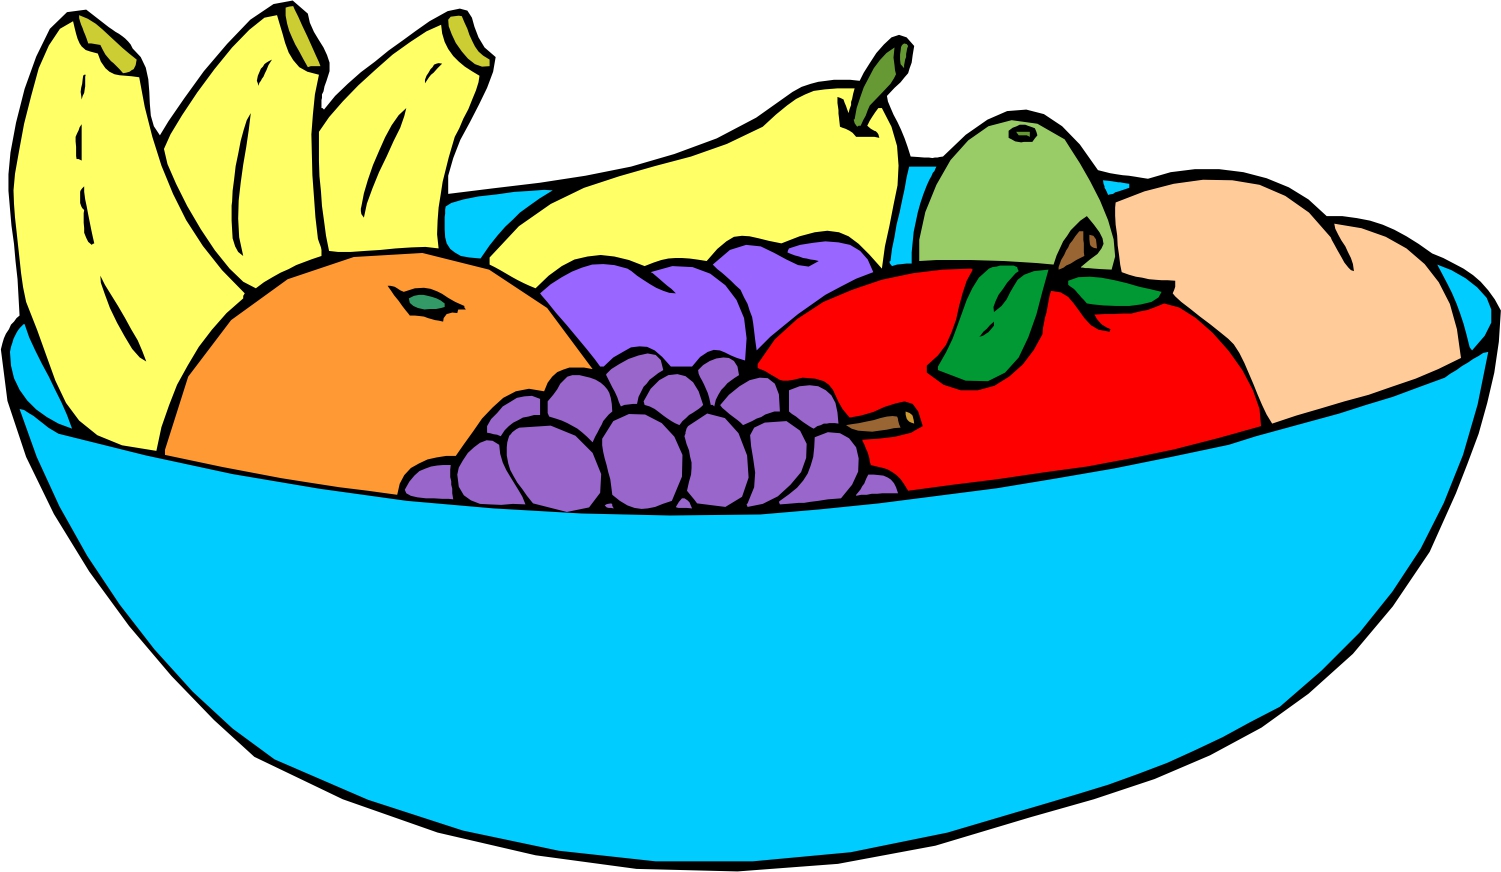 Free Animated Fruit Pictures, Download Free Clip Art, Free